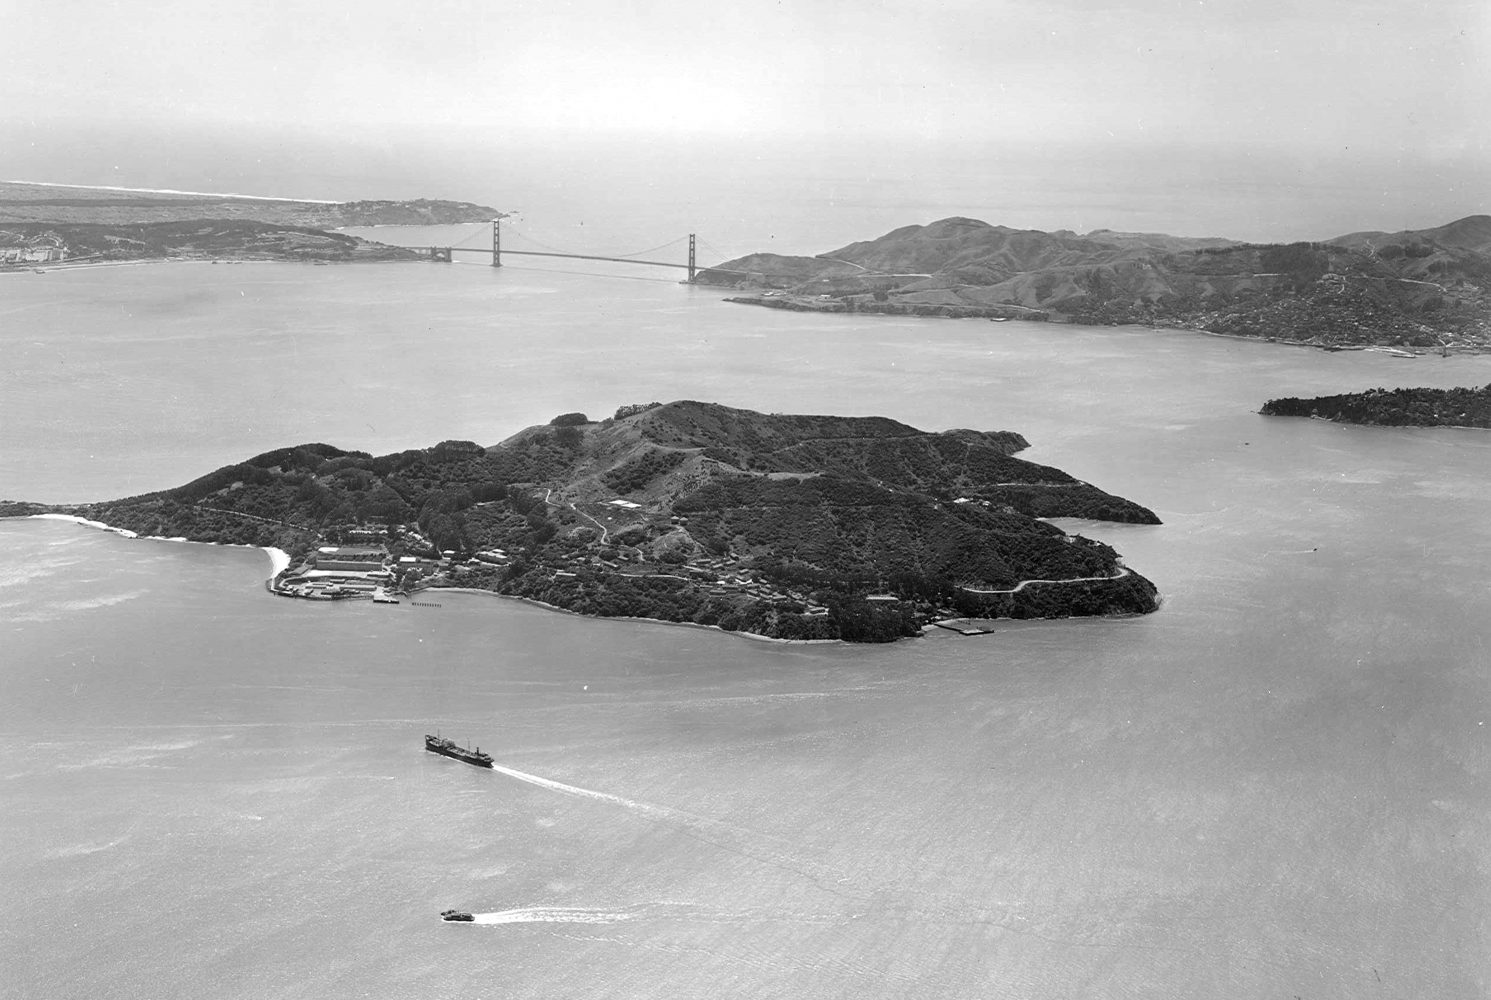 Angel Island; A Place Of Many Stories